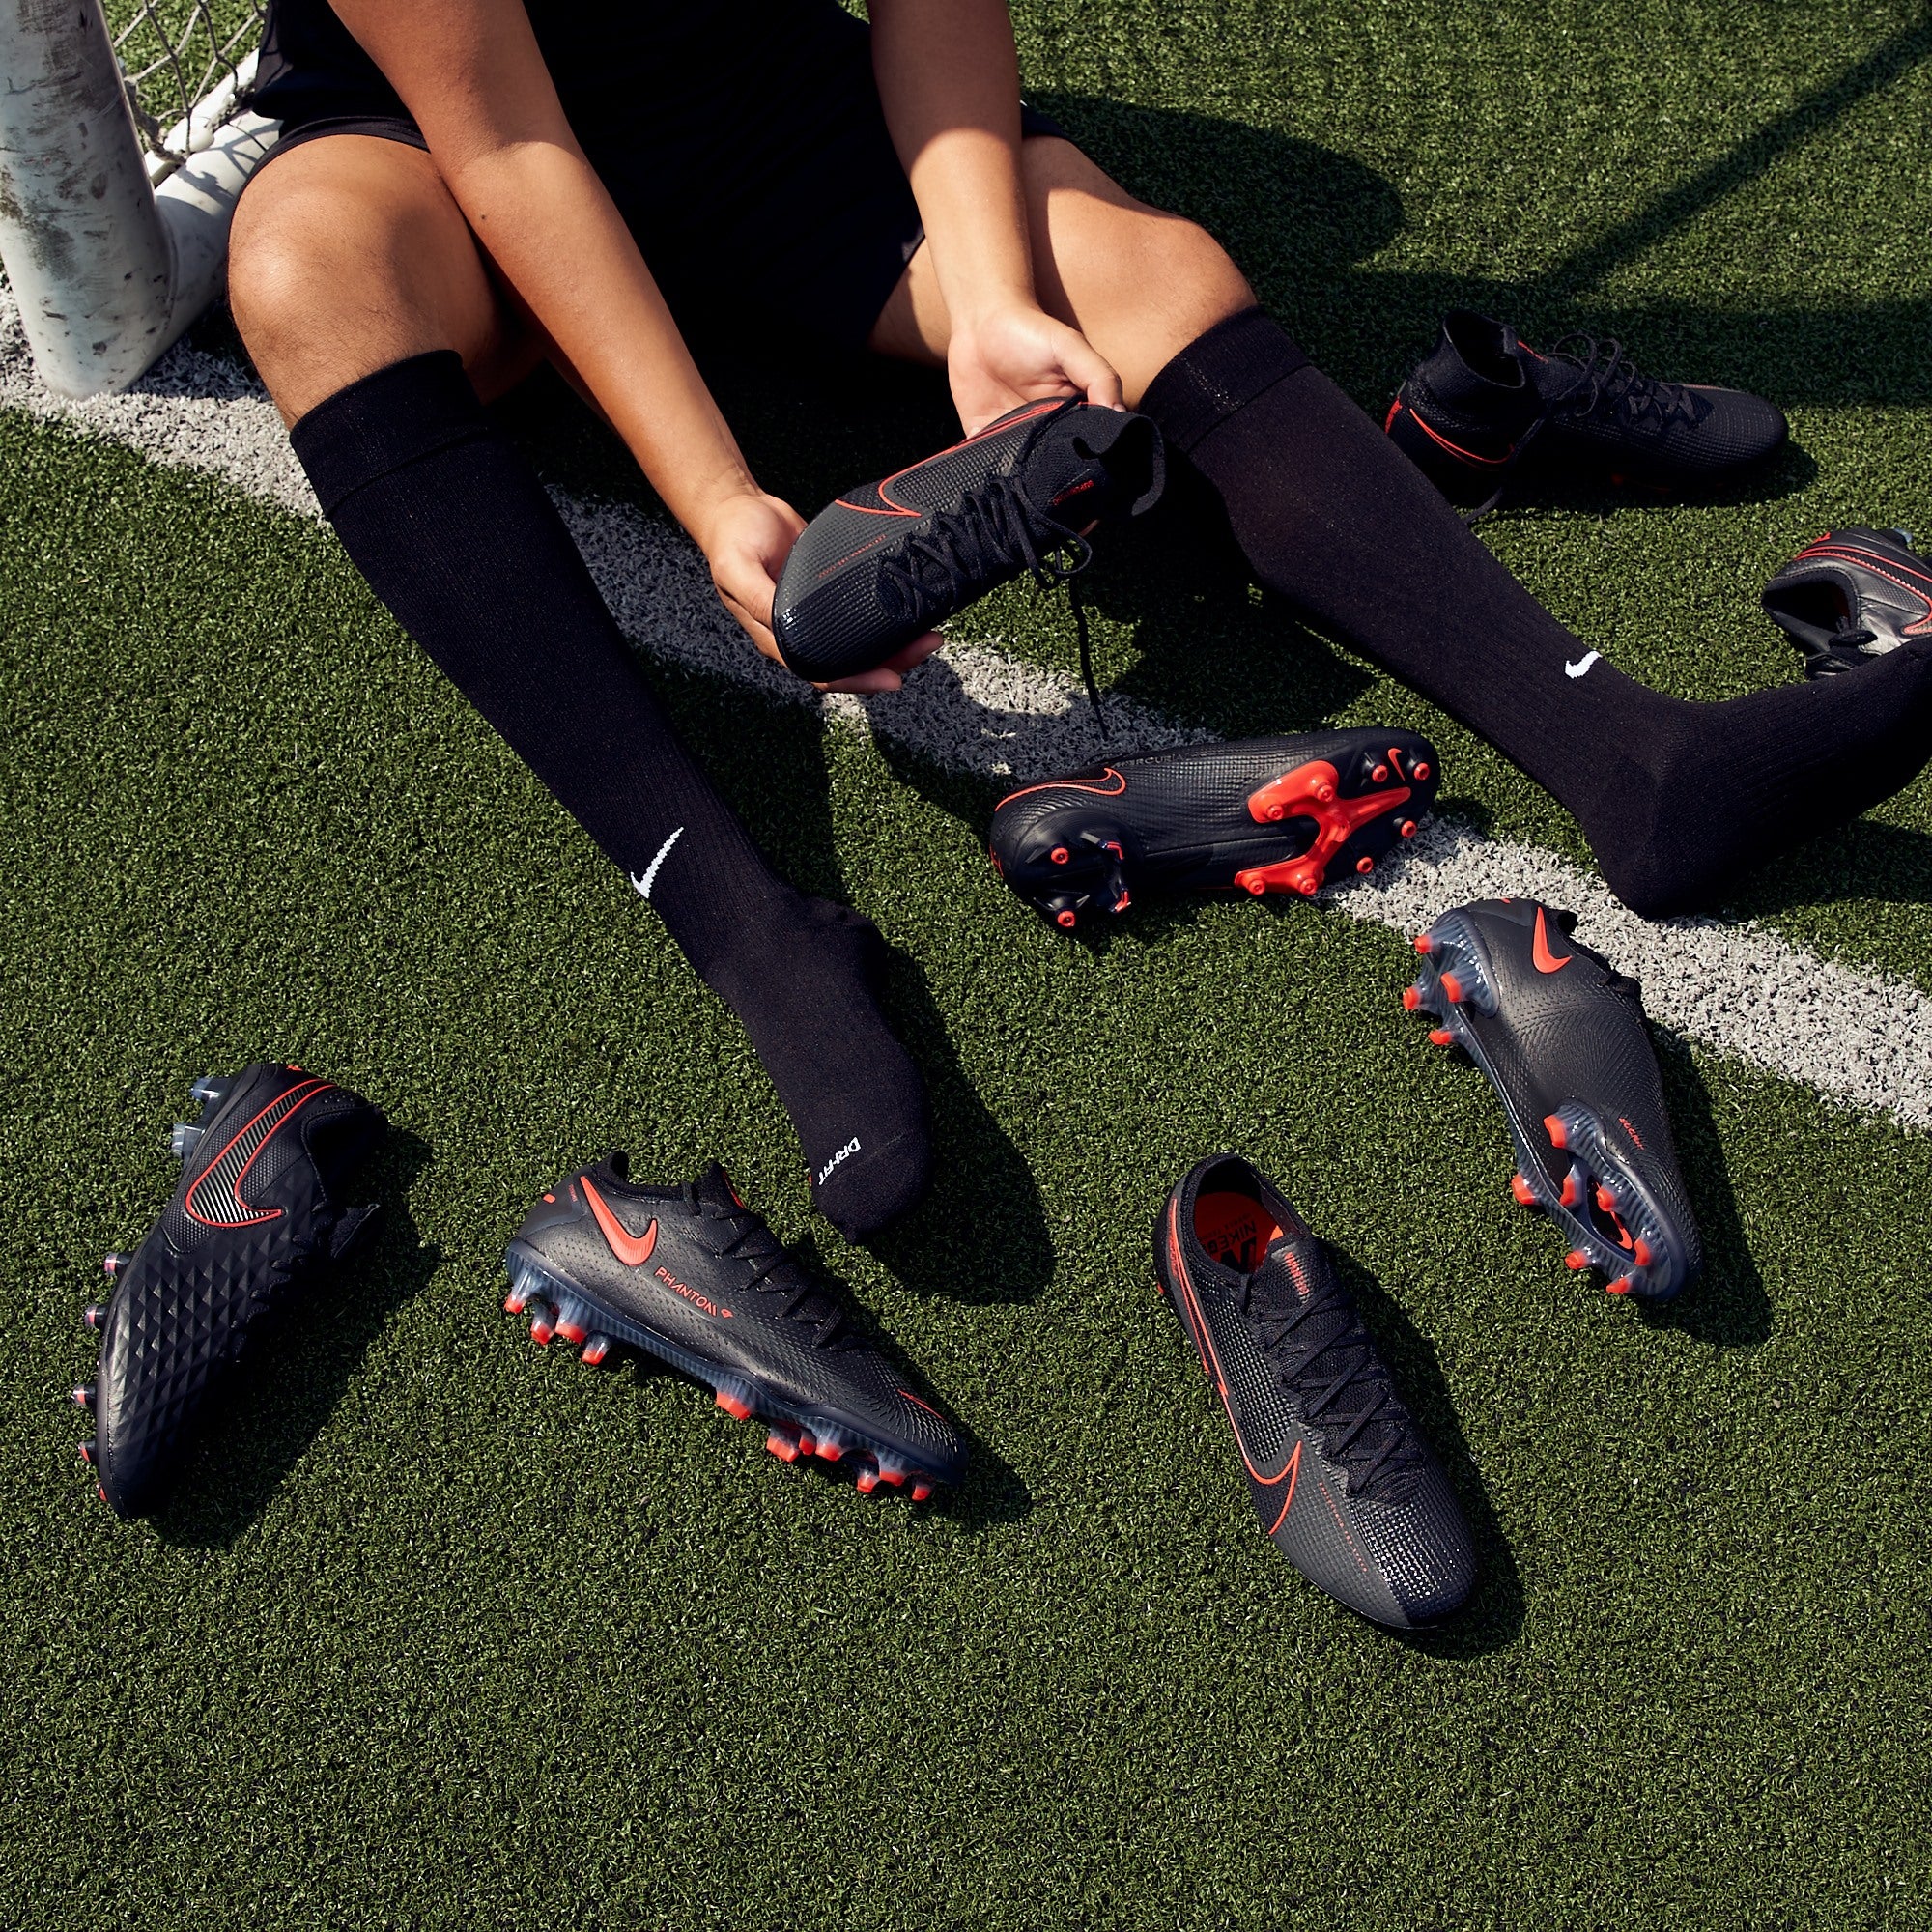 Using Natural Grass footwear on Artificial Surfaces